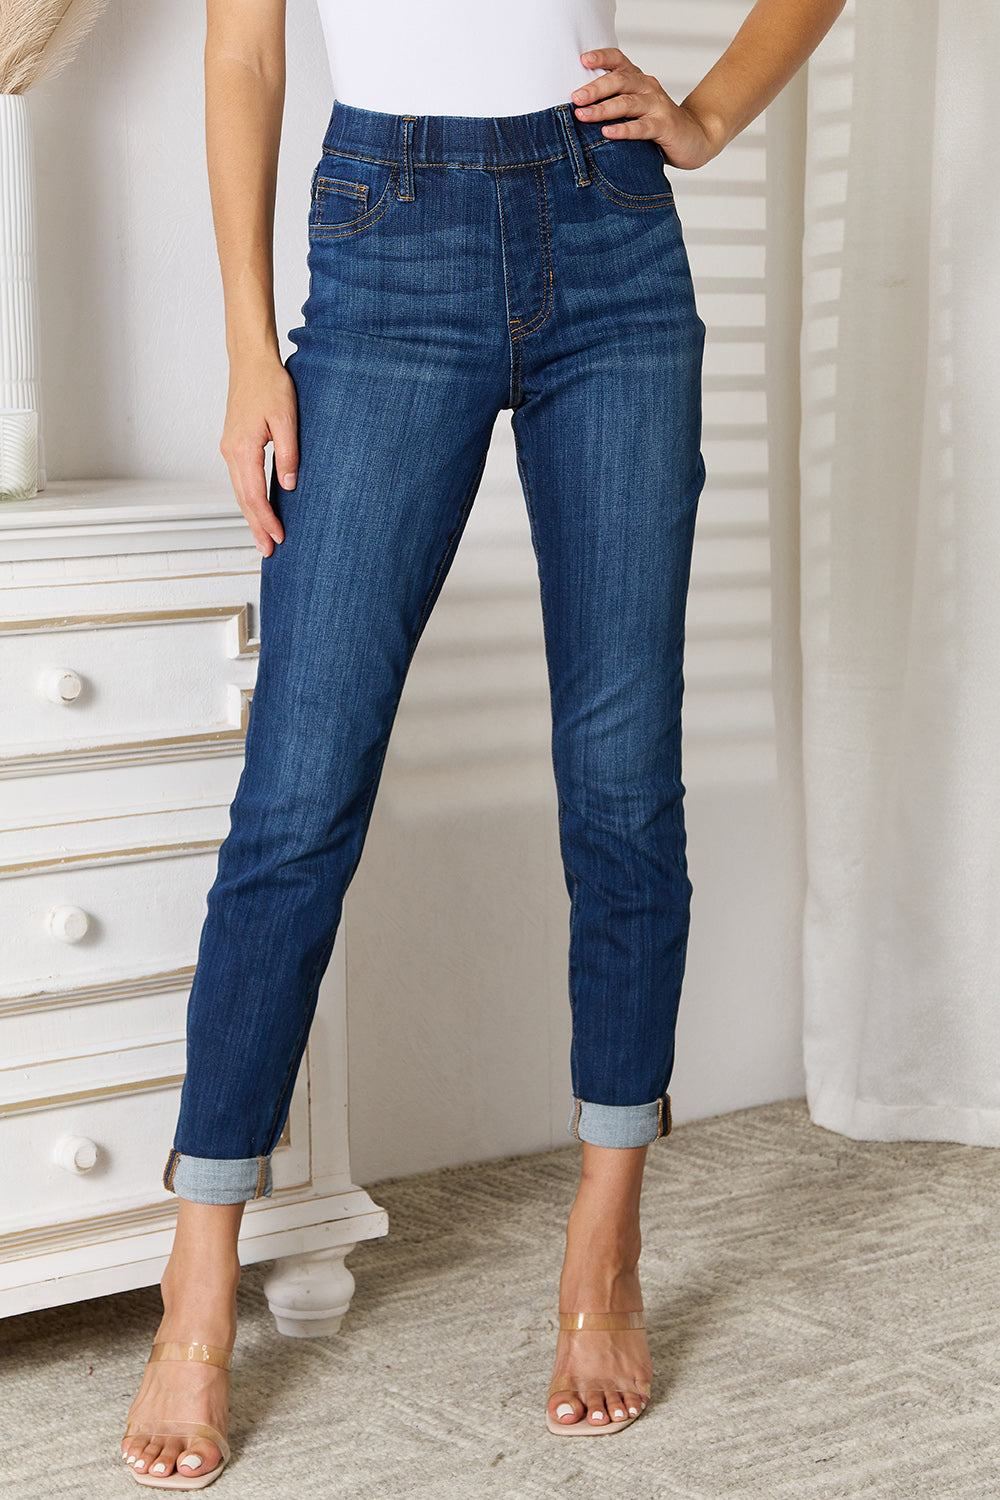 Judy Blue - Pull On Skinny Jeans - Inspired Eye Boutique